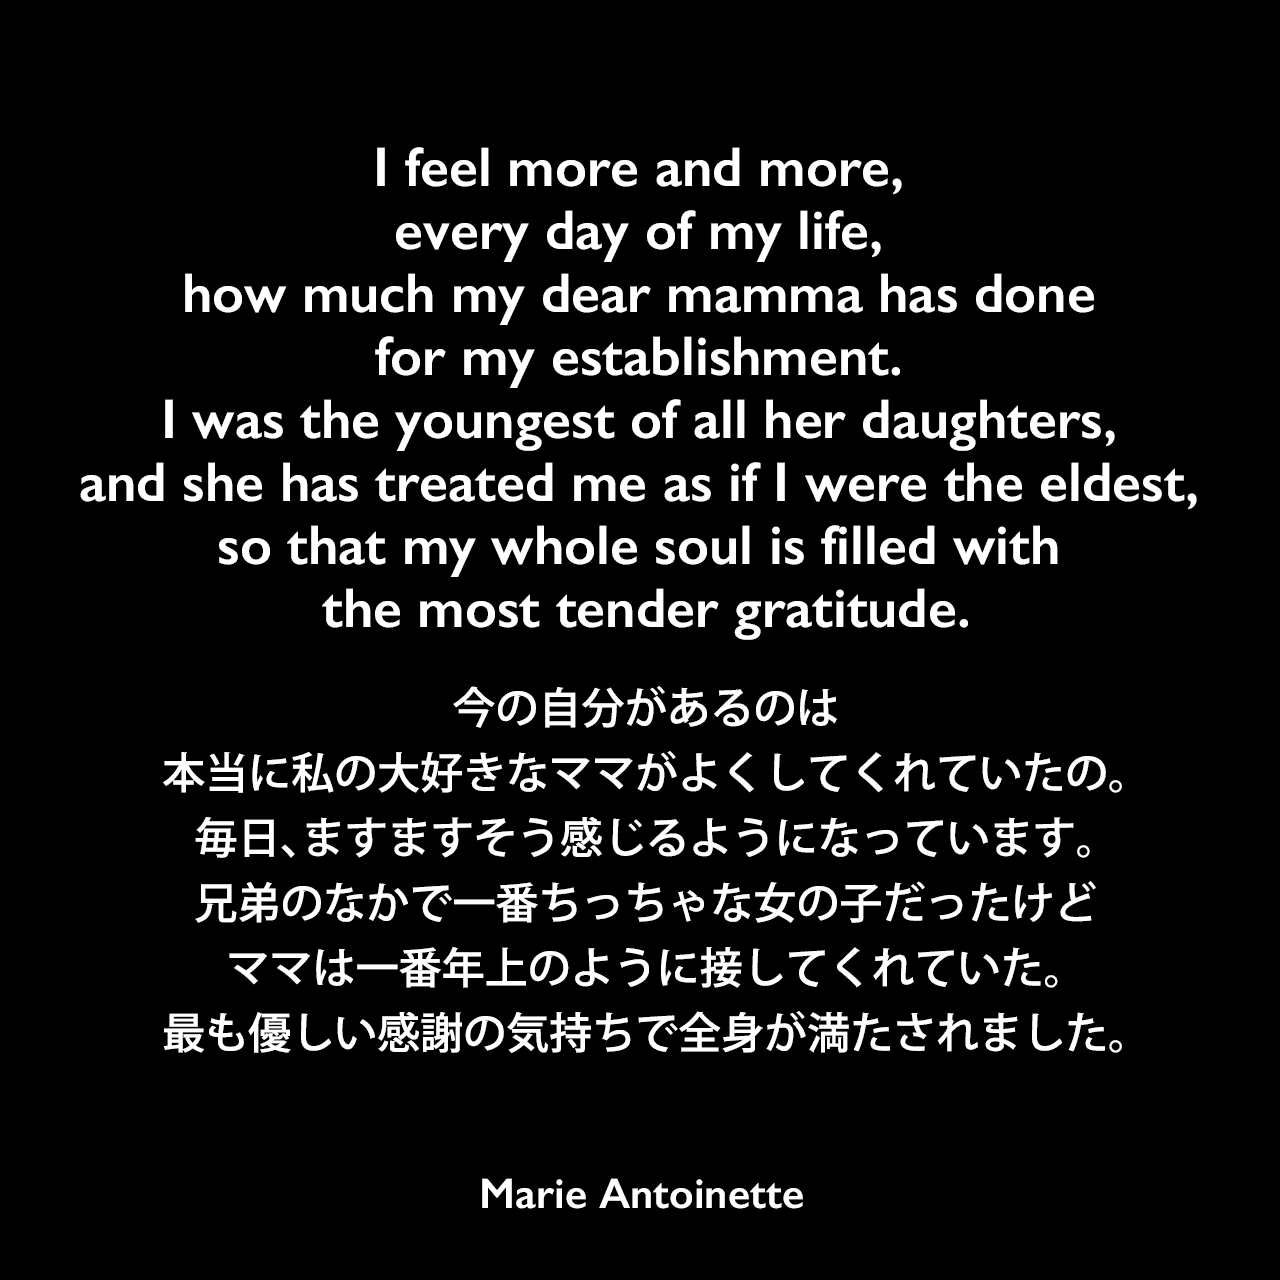 I feel more and more, every day of my life, how much my dear mamma has done for my establishment. I was the youngest of all her daughters, and she has treated me as if I were the eldest, so that my whole soul is filled with the most tender gratitude.今の自分があるのは、本当に私の大好きなママがよくしてくれていたの。毎日、ますますそう感じるようになっています。兄弟のなかで一番ちっちゃな女の子だったけど、ママは一番年上のように接してくれていた。最も優しい感謝の気持ちで全身が満たされました。Marie Antoinette